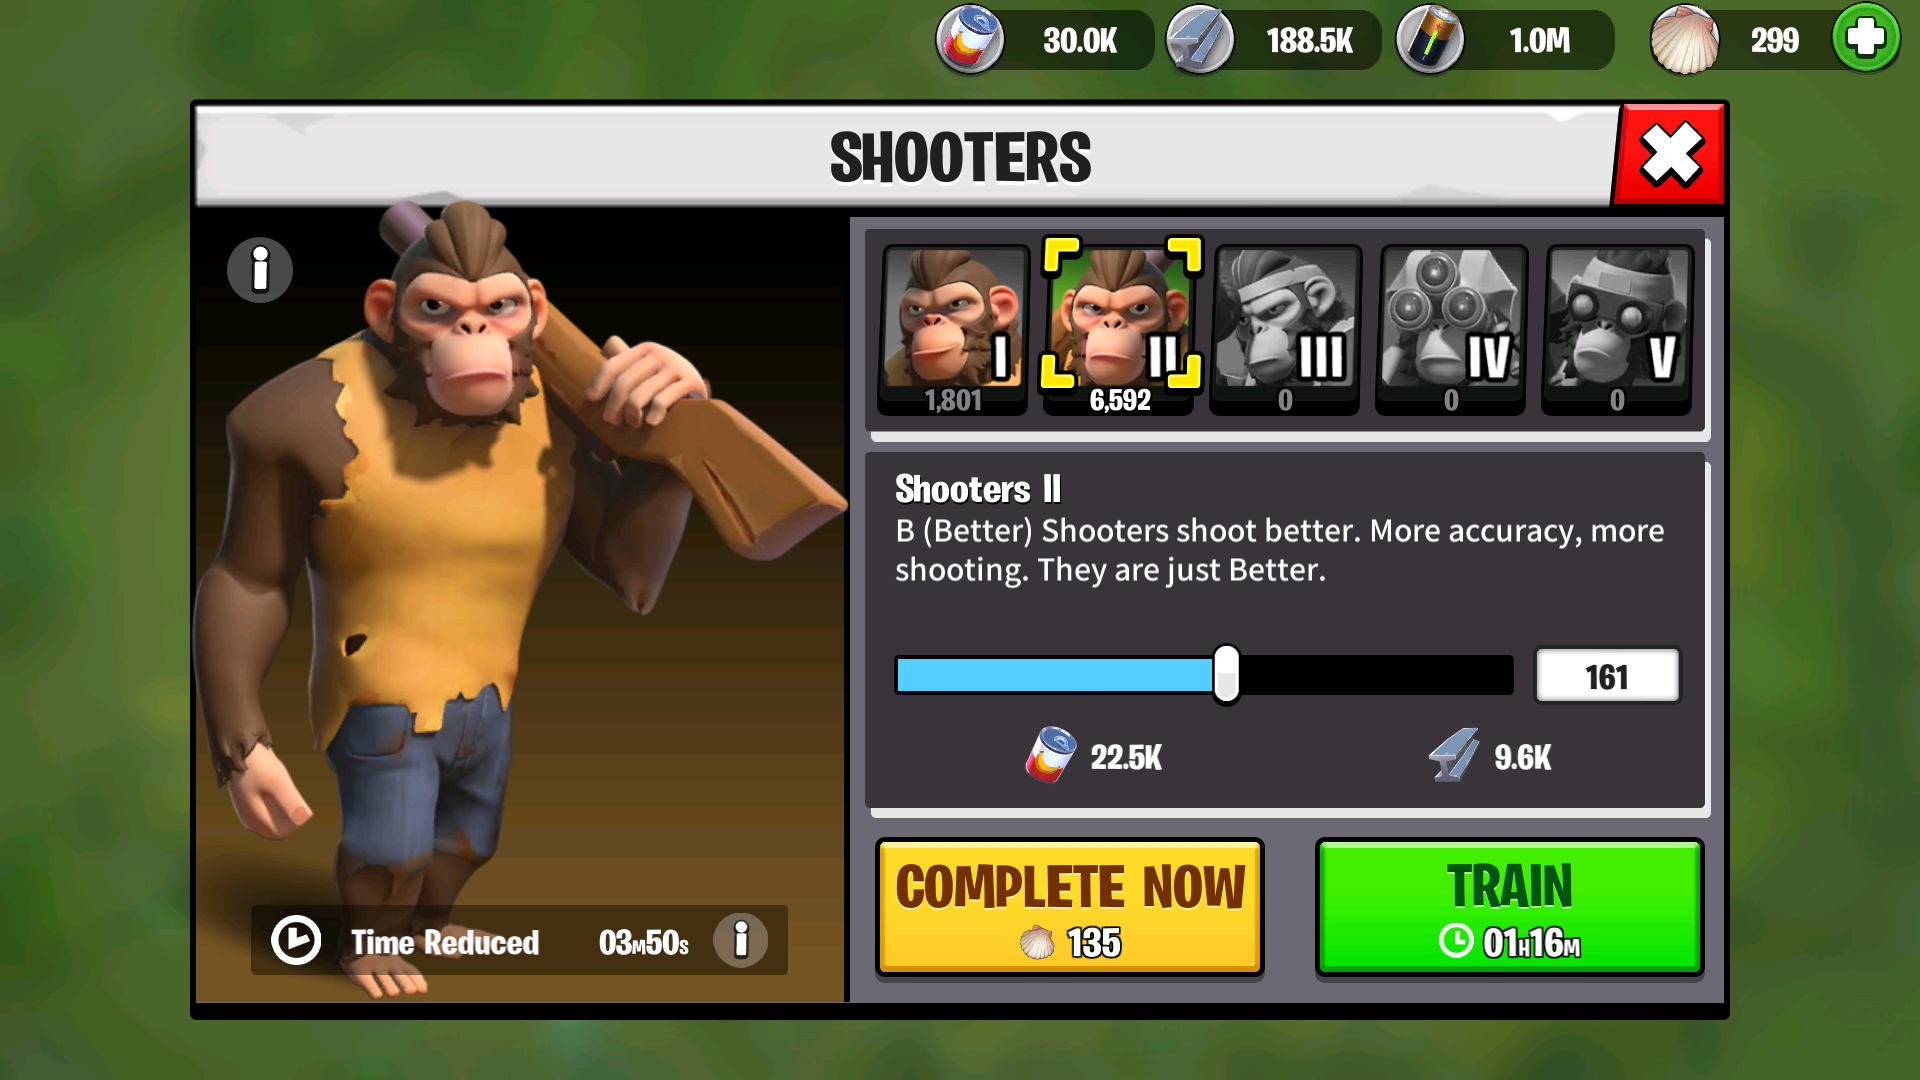 game image from Meta Apes